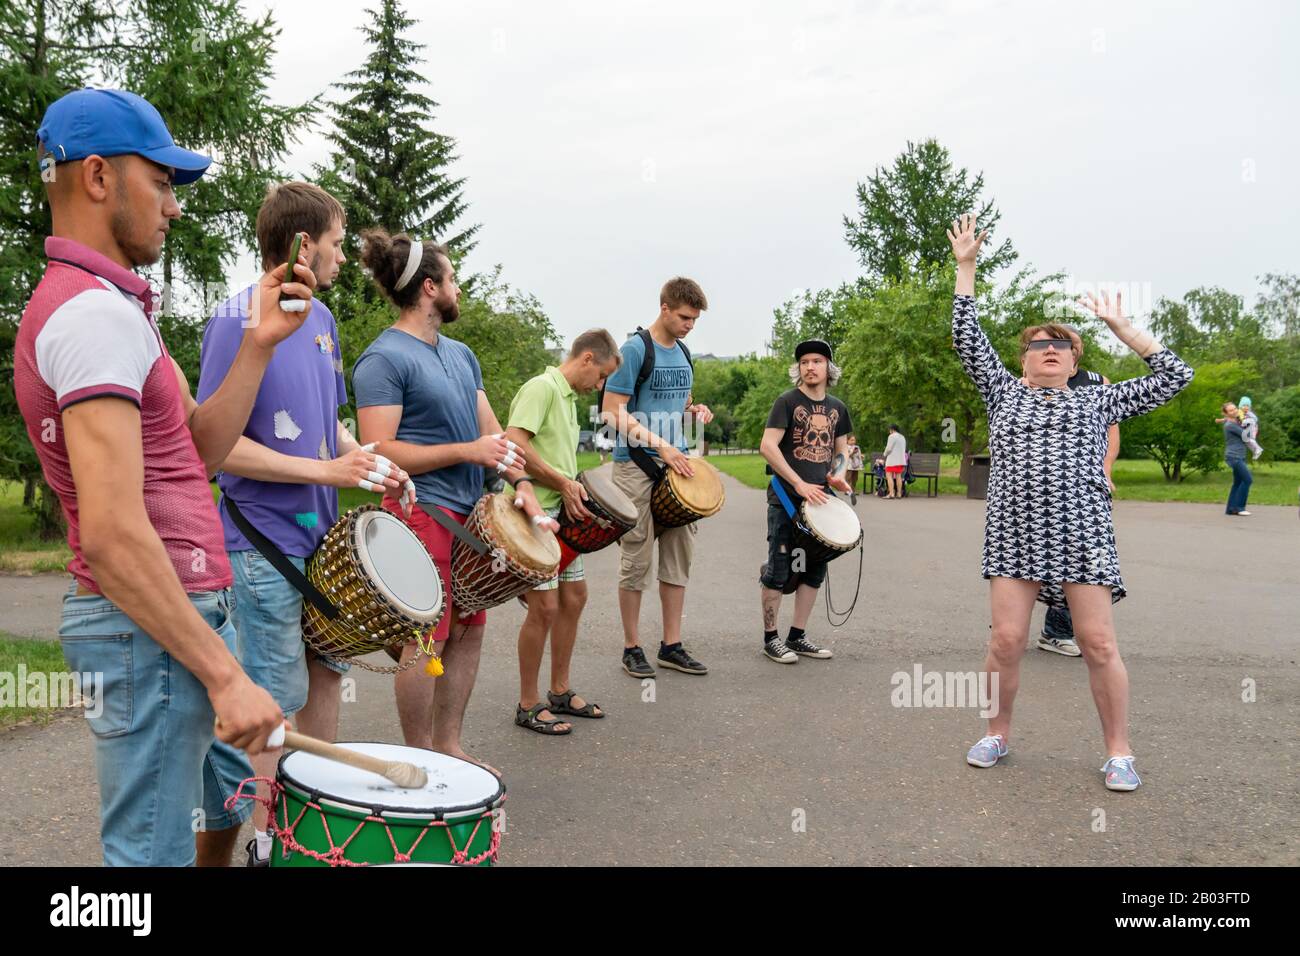 Krasnoyarsk, Russia, June 30, 2019: Adult woman funny dancing in front of men playing African drums Tam Tam djembe in a public Park in the summer. Stock Photo